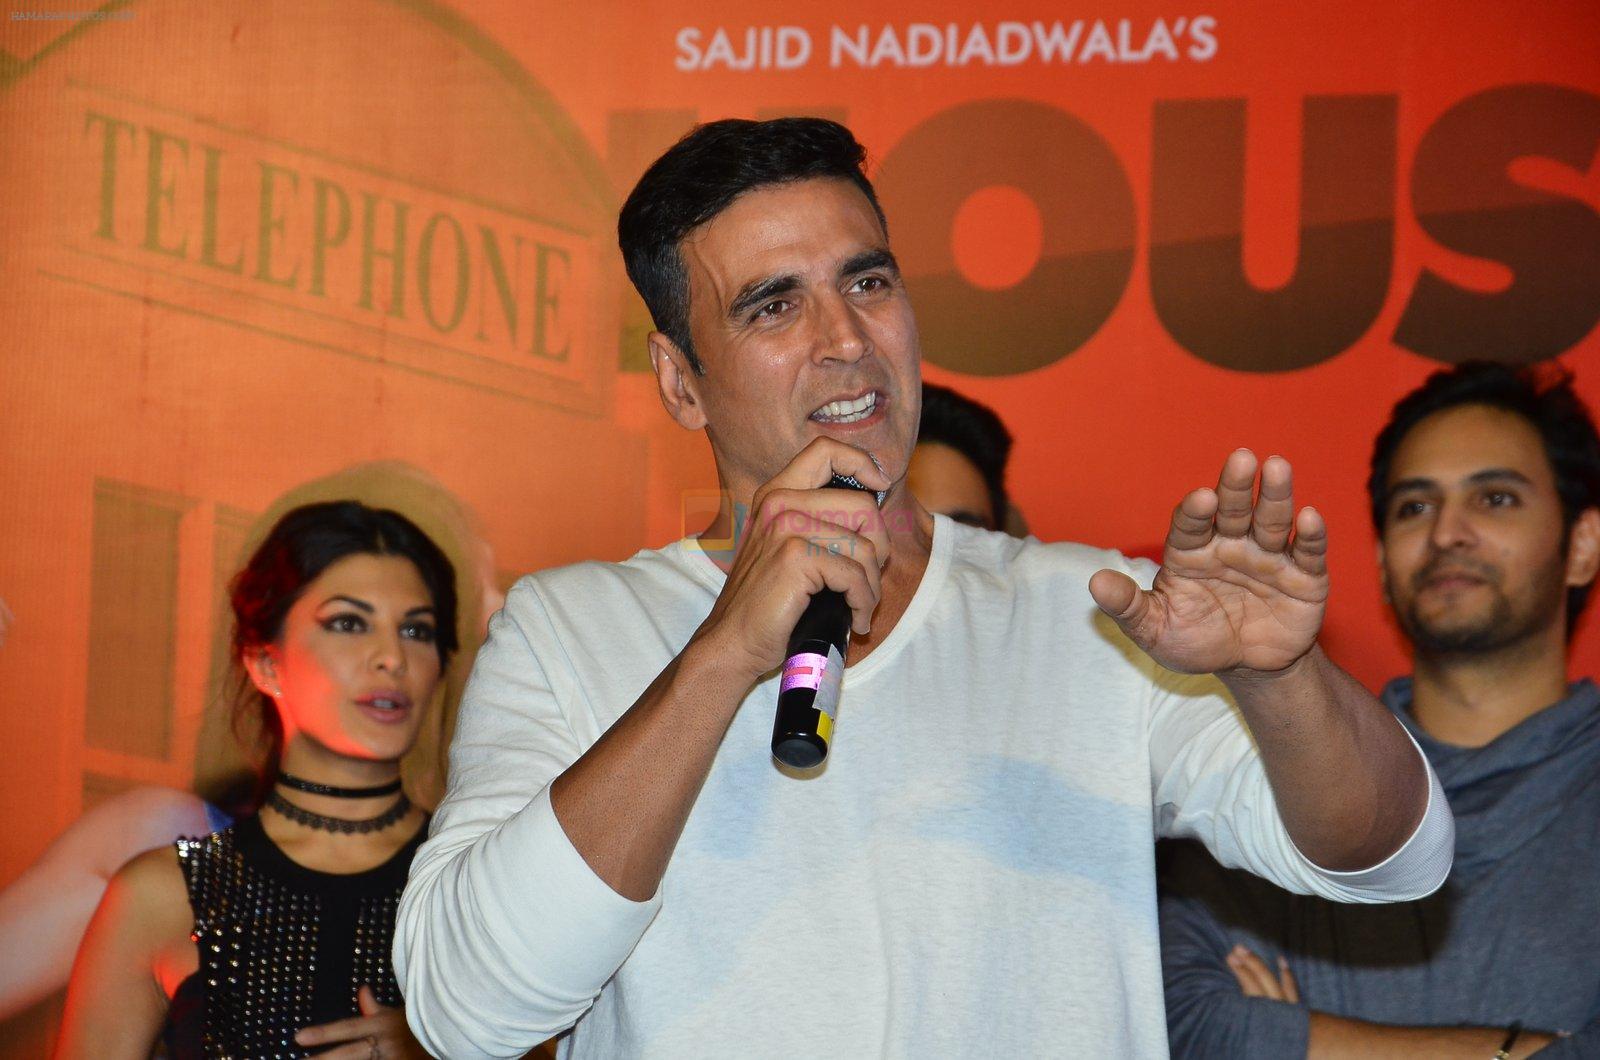 Akshay Kumar at the Launch of the song Taang Uthake from the film Housefull 3 on 6th May 2016